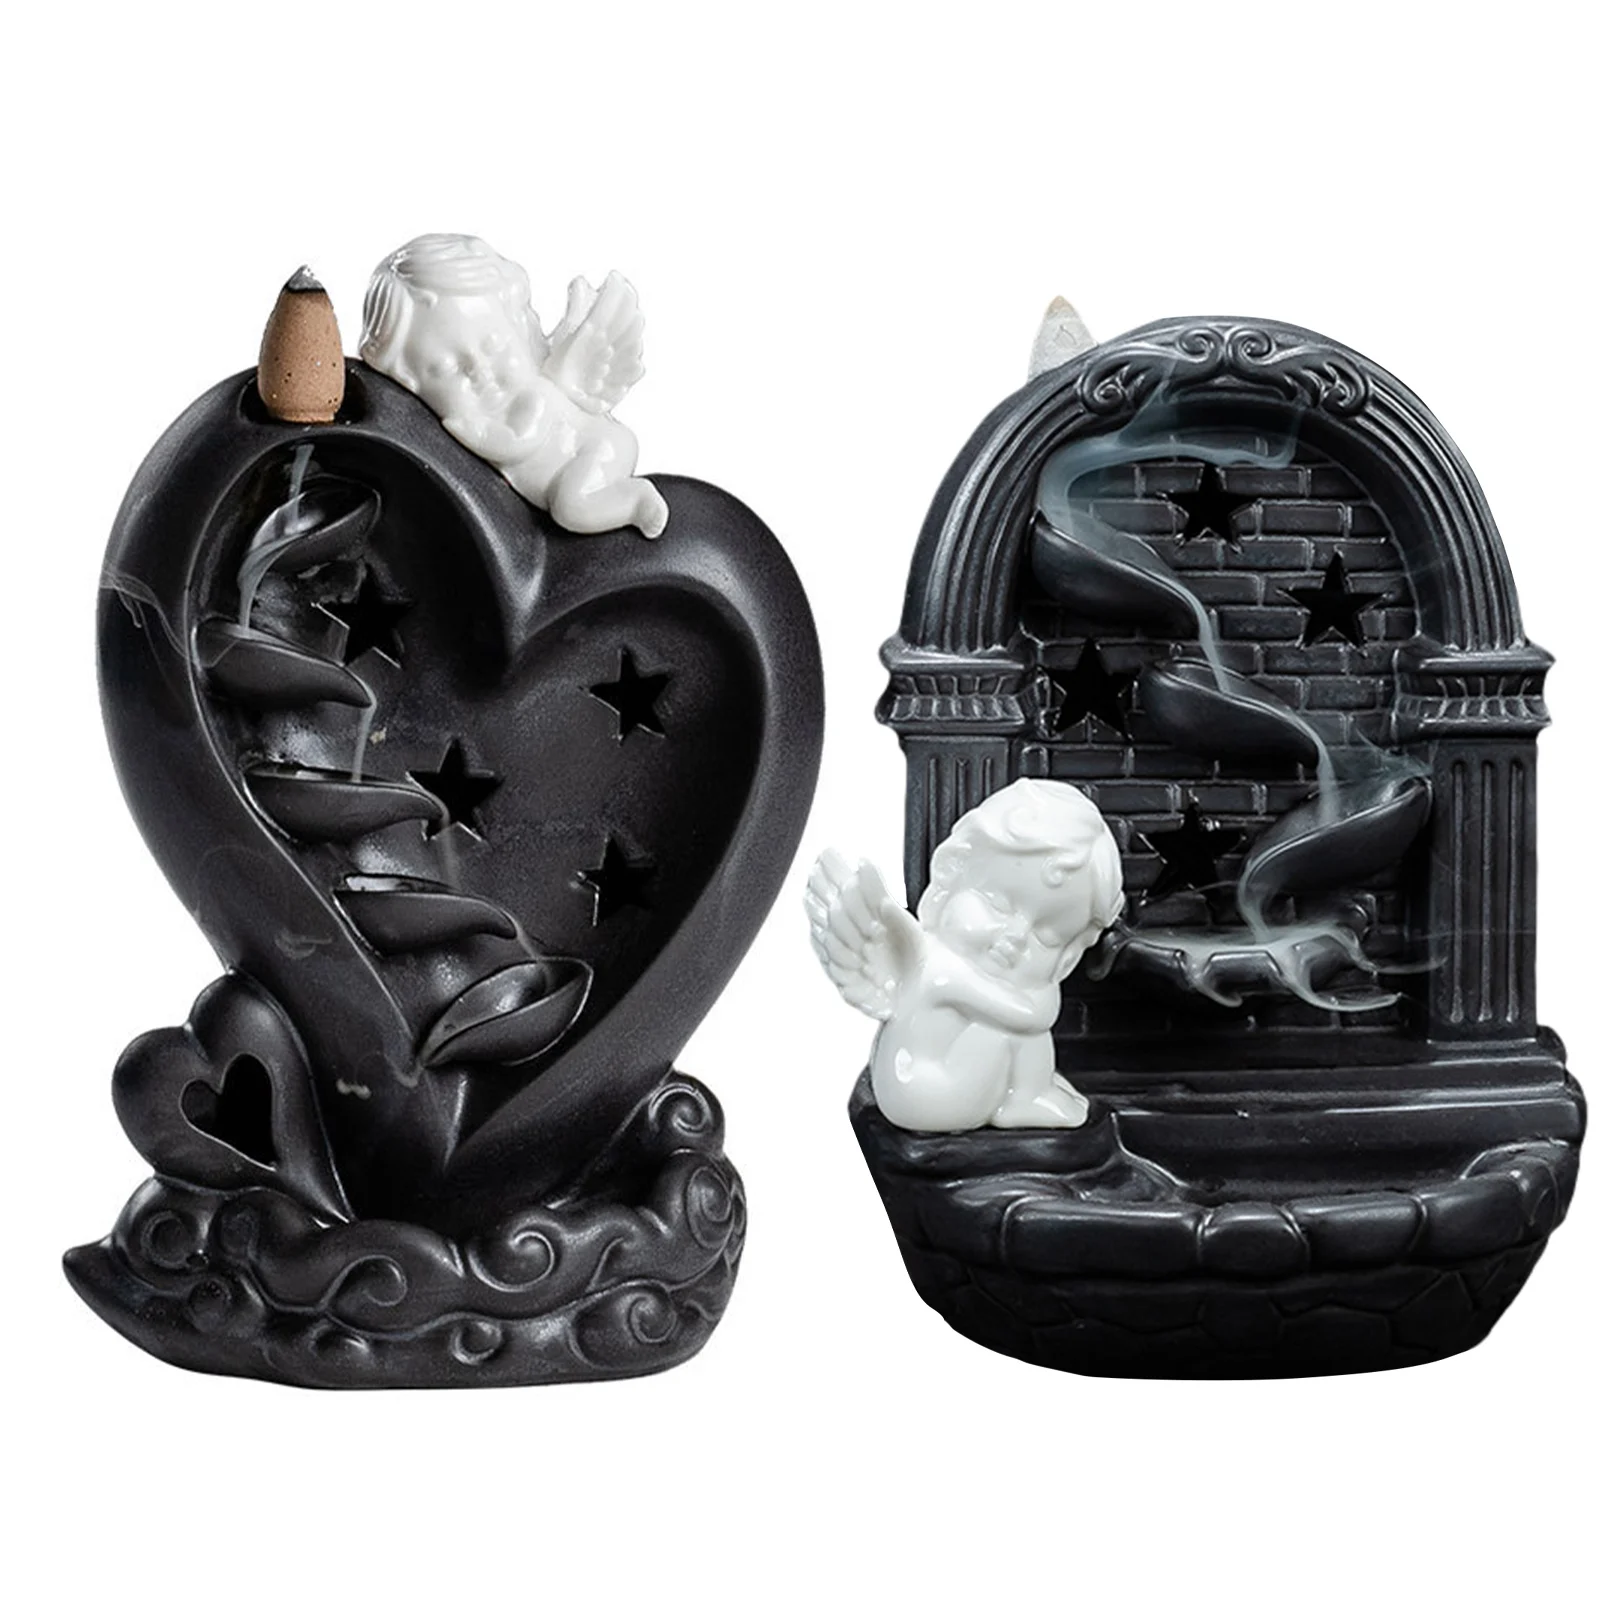 Cupid Backflow Incense Burner with LED Light Incense Holder Decor the god of love Mysterious Atmosphere Handmade Easy to Clean